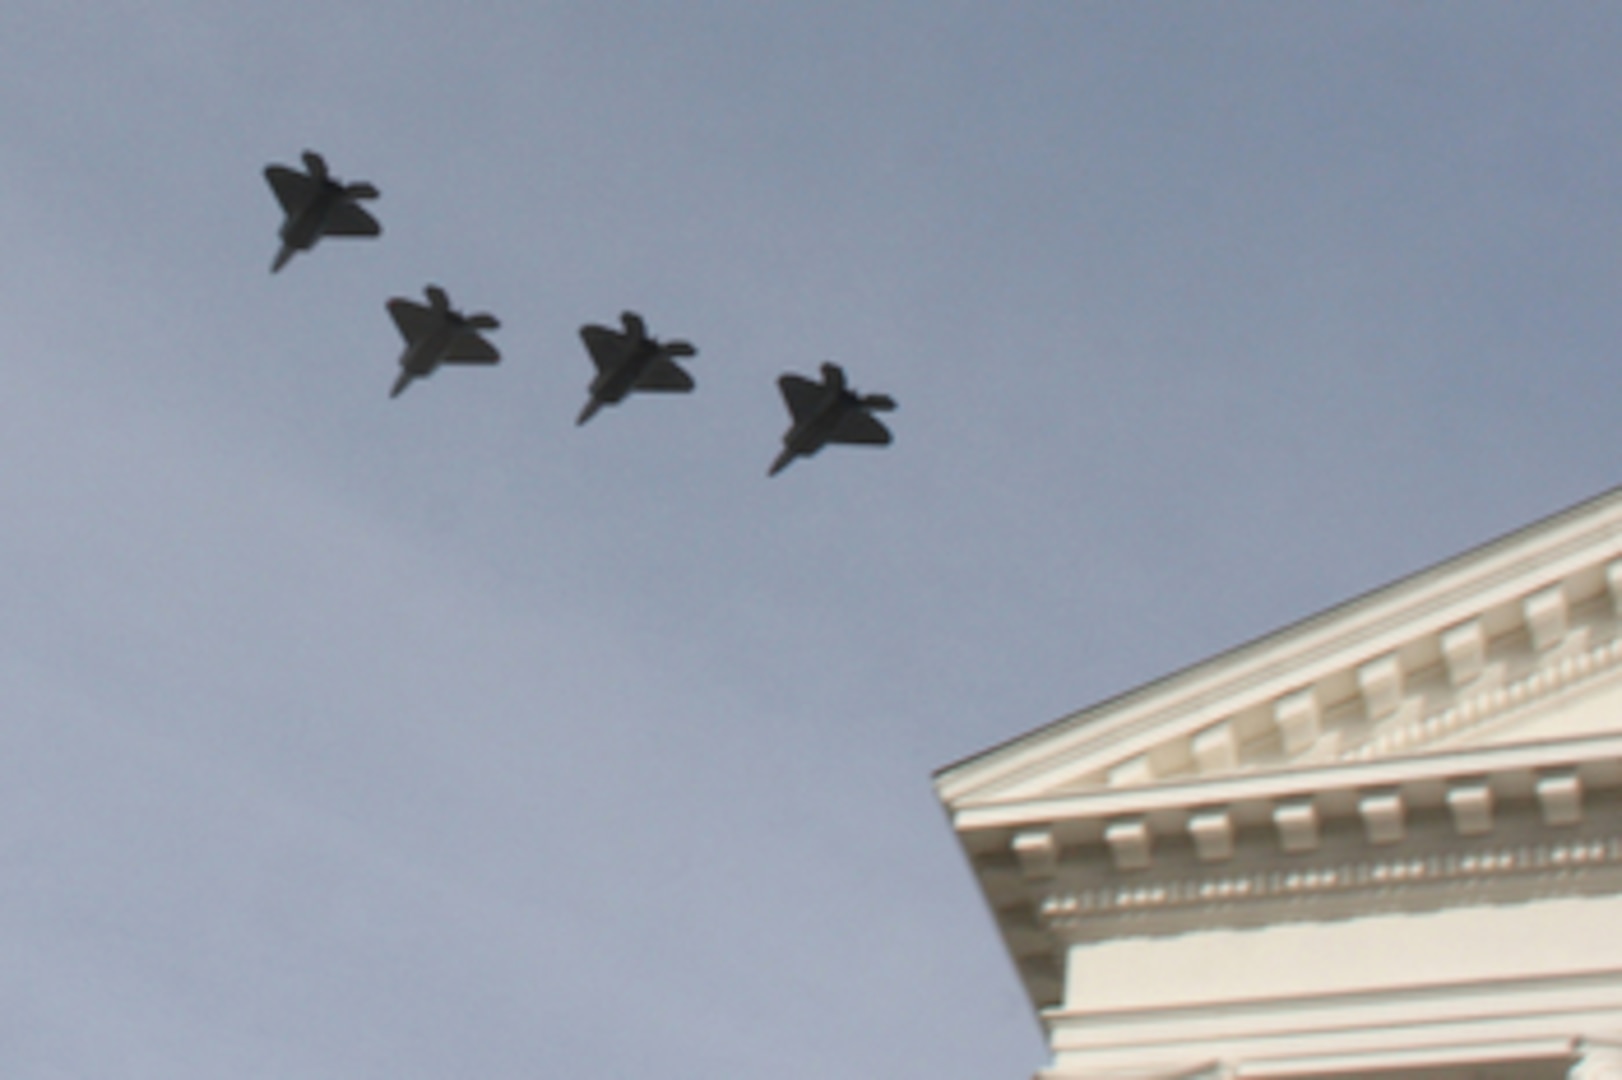 Virginia National Guard supports Gov. McDonnell Inauguration